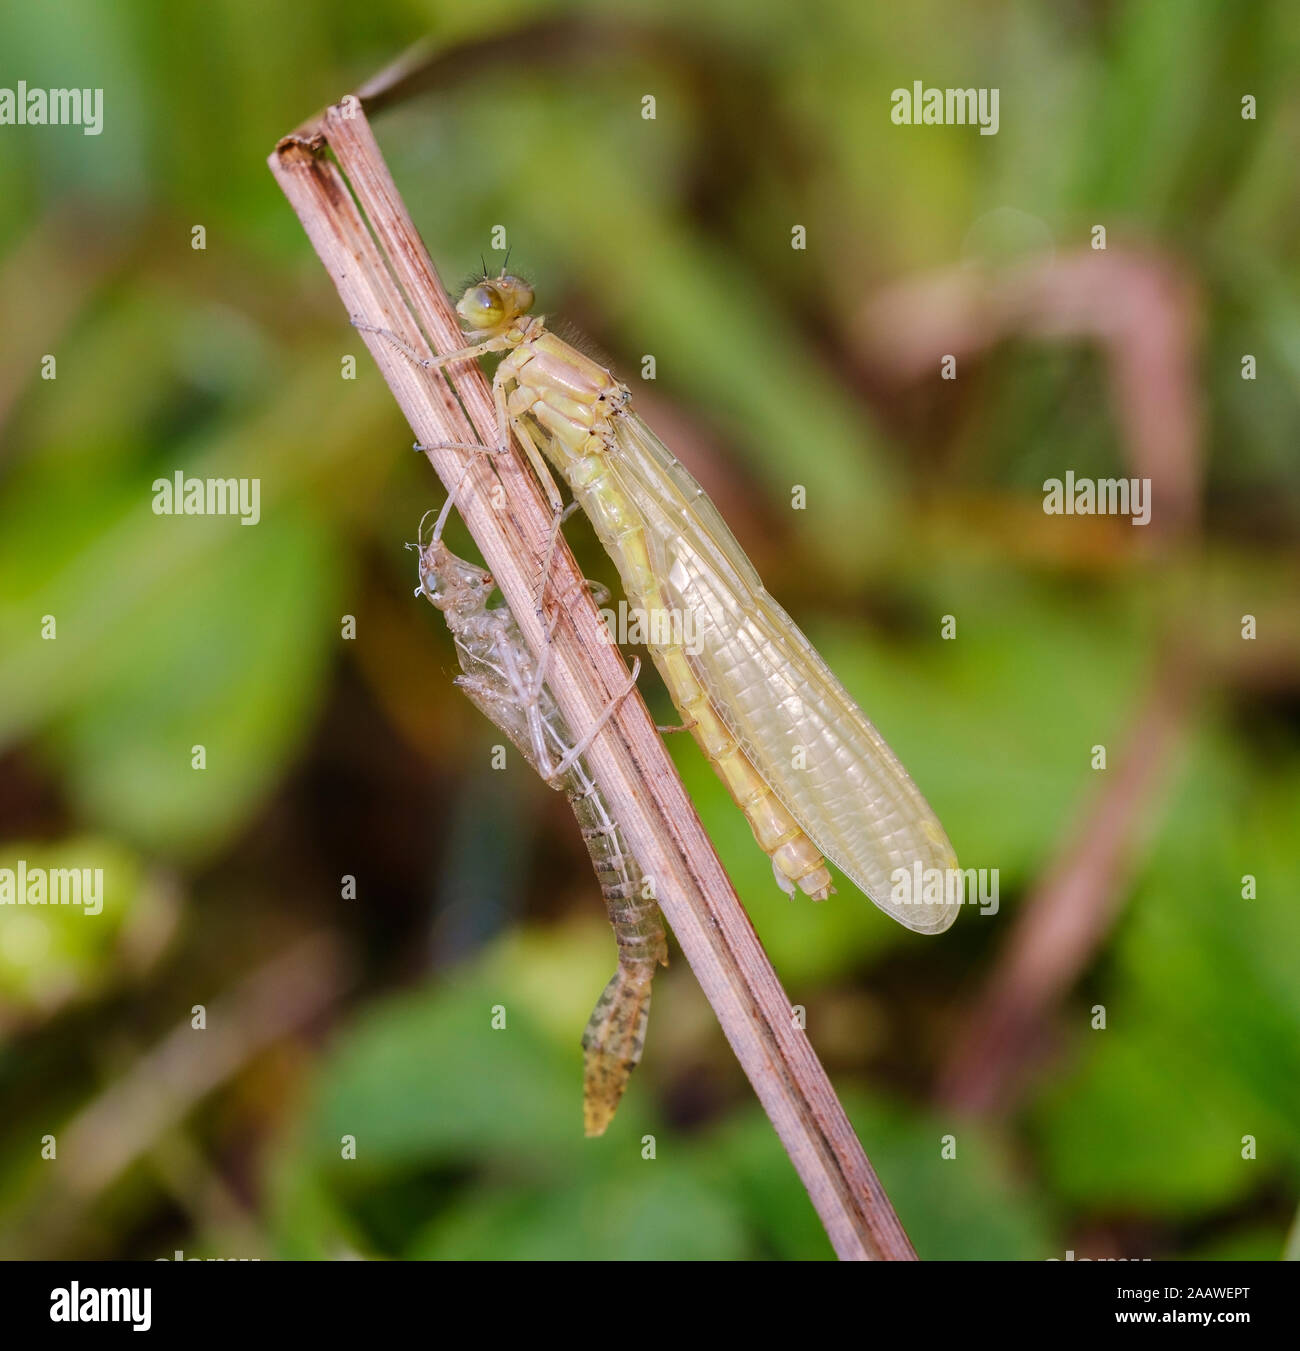 Germany, Bavaria, Upper Bavaria, Pupplinger Au, newly hatched young damselfly (Zygoptera) and exuvia Stock Photo